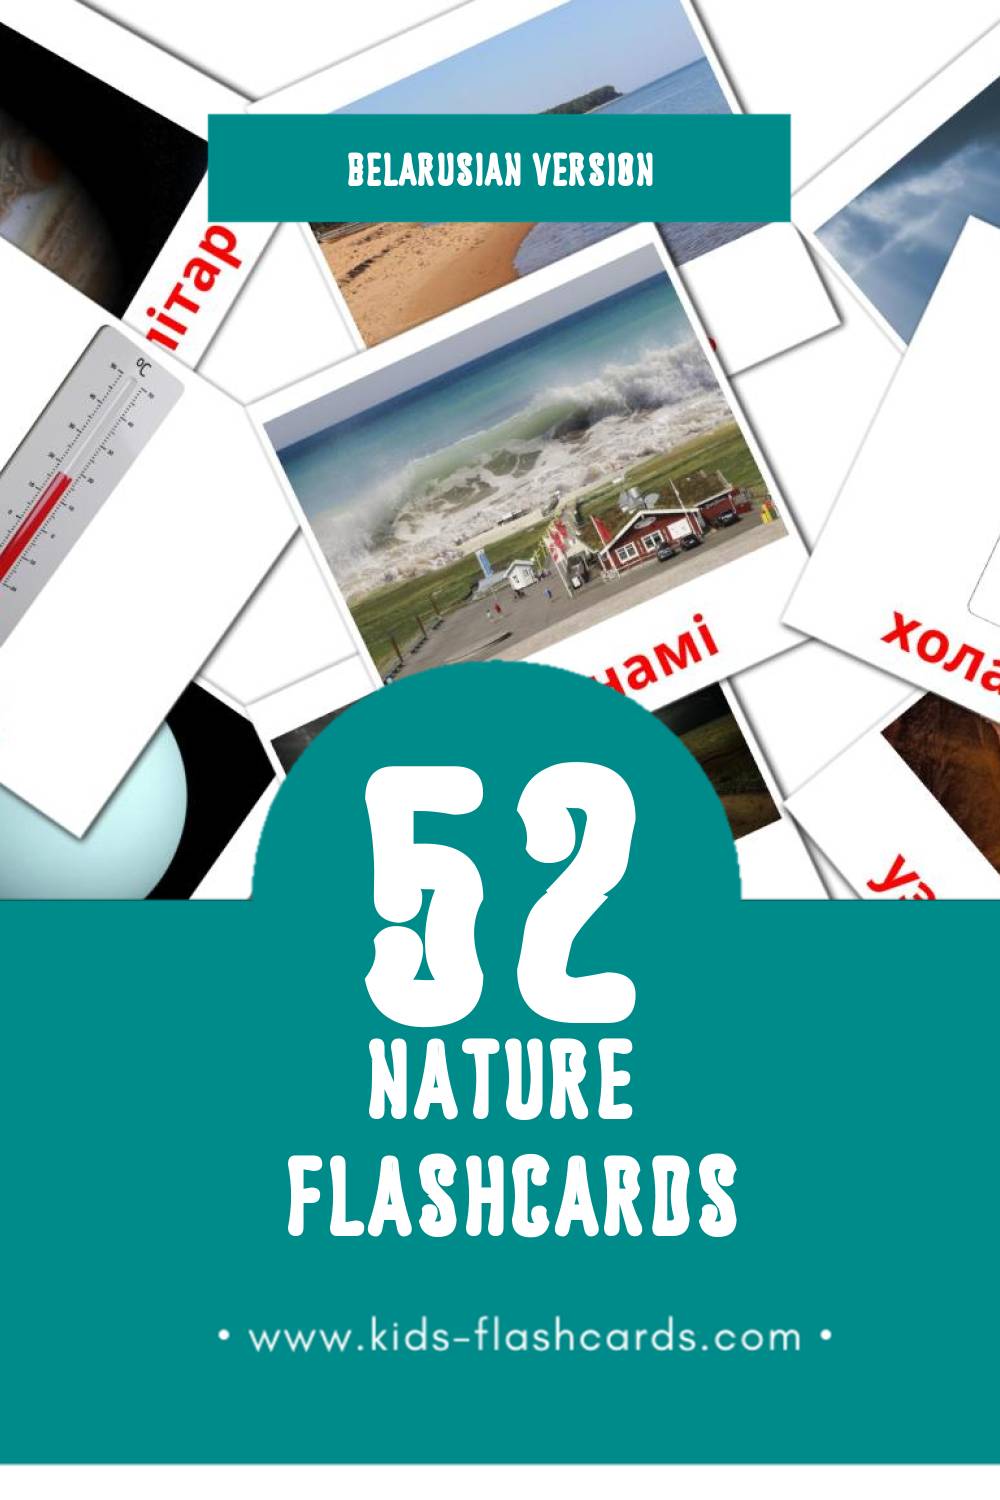 Visual Прырода Flashcards for Toddlers (31 cards in Belarusian)